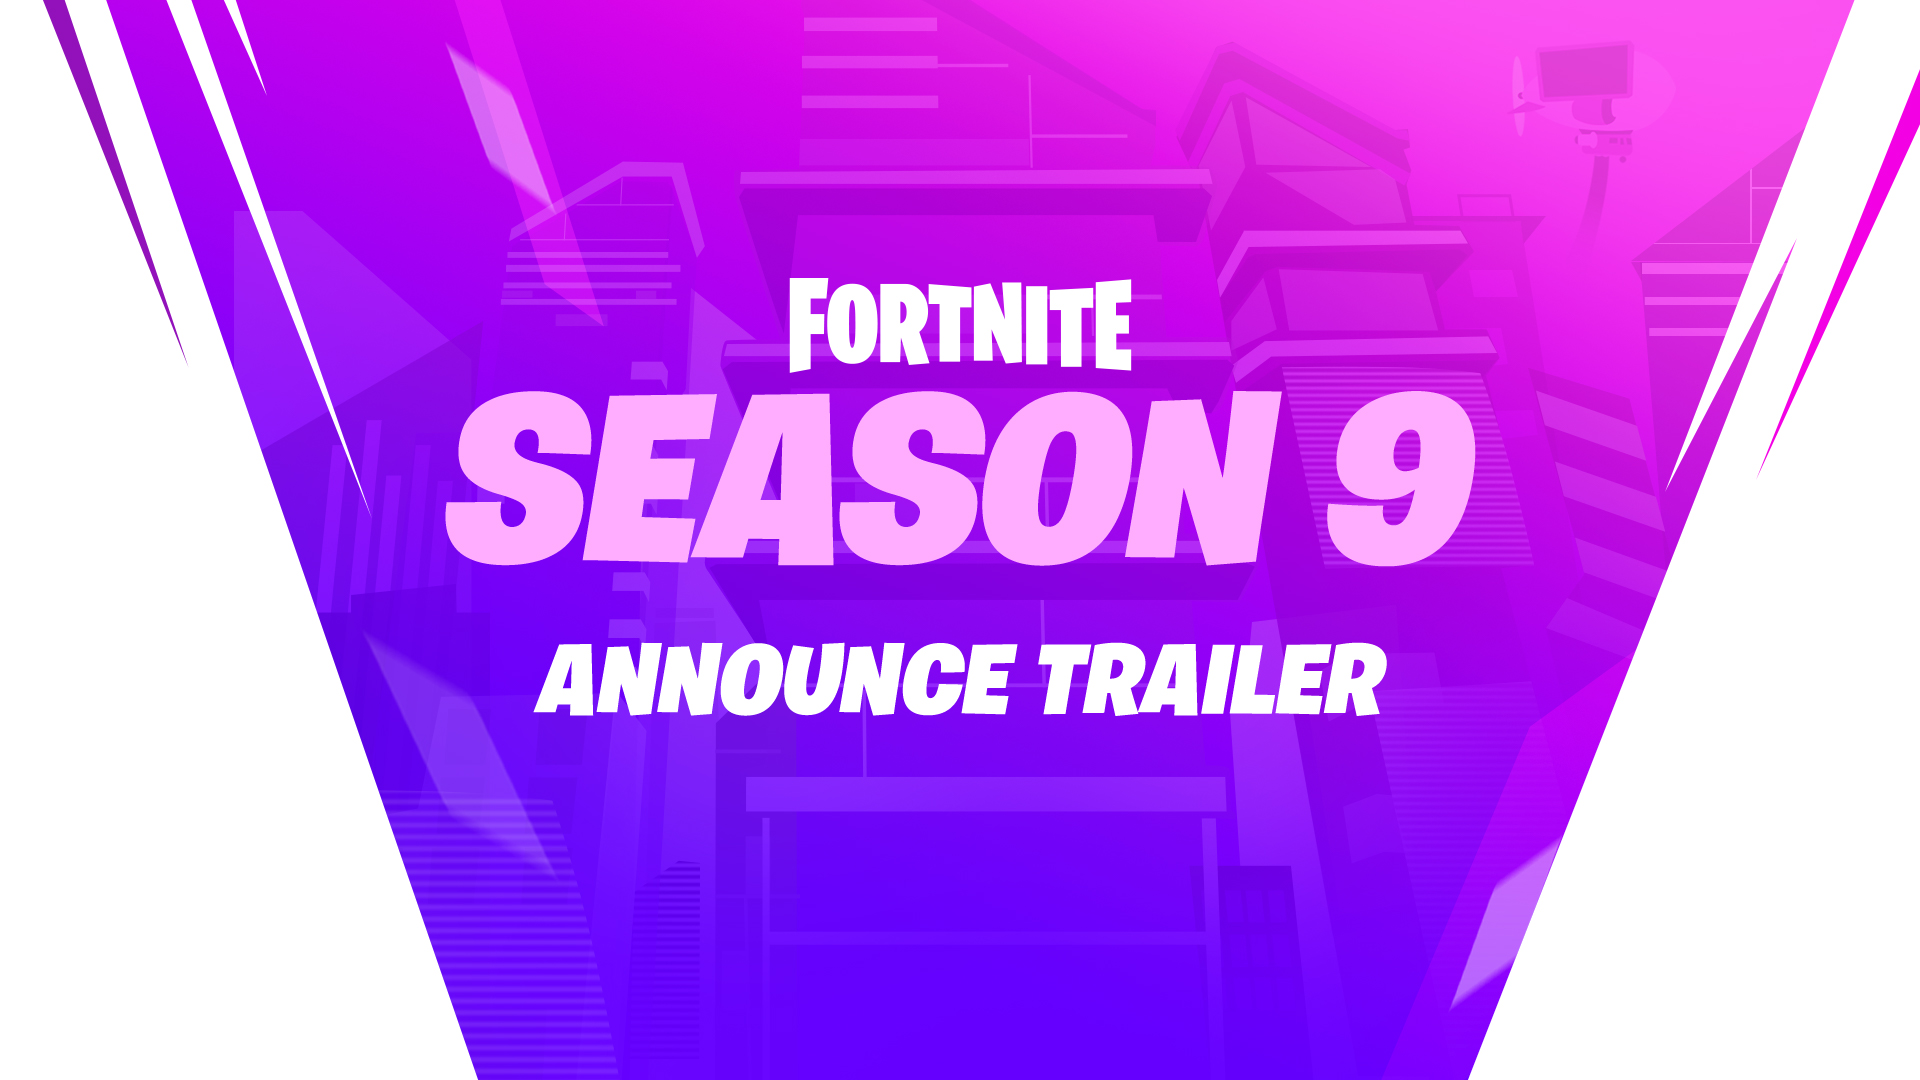 Fortnite For Xbox One Xbox - play fortnite season 9 announce trailer outline of a building in pink to black gradient